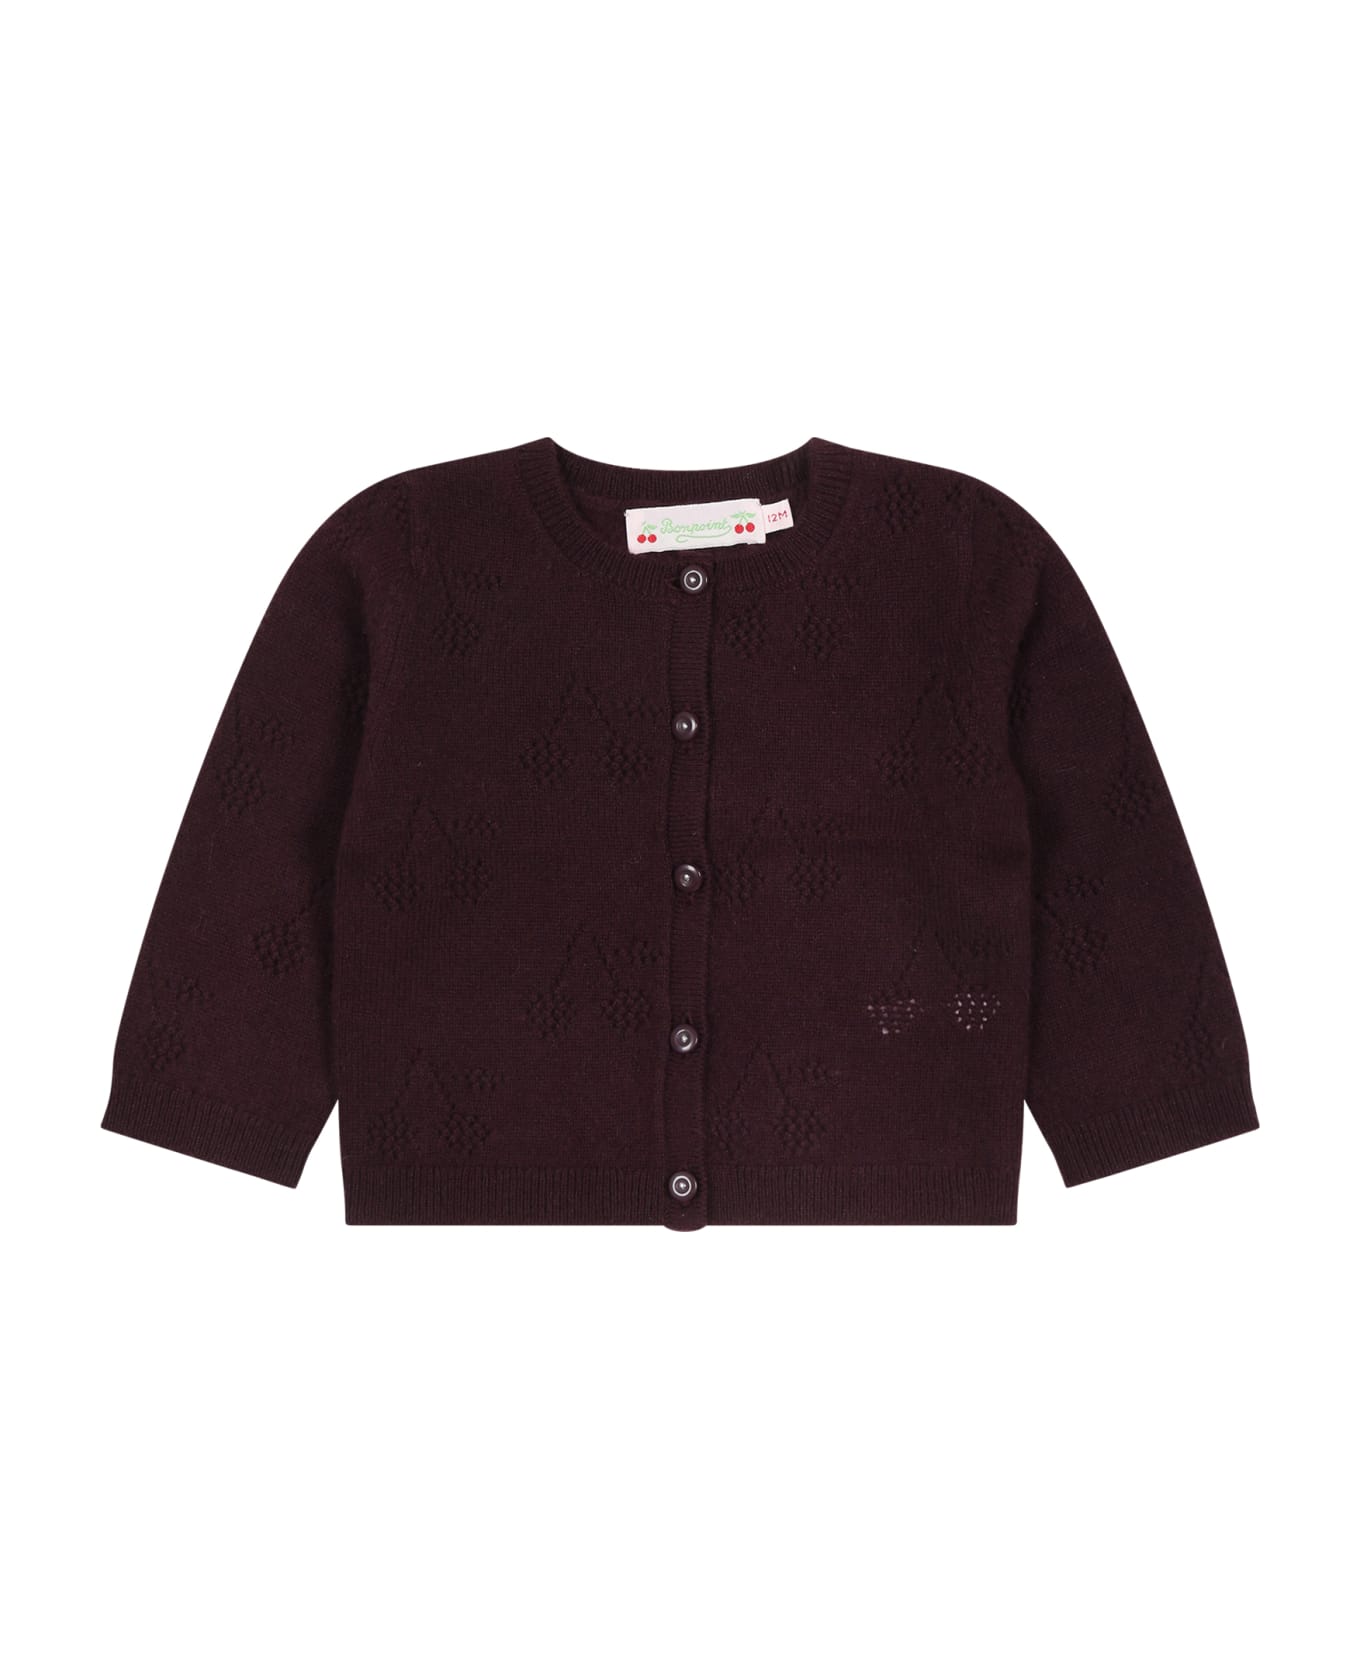 Bonpoint Burgundy Cardigan For Baby Girl With Cherries - Bordeaux